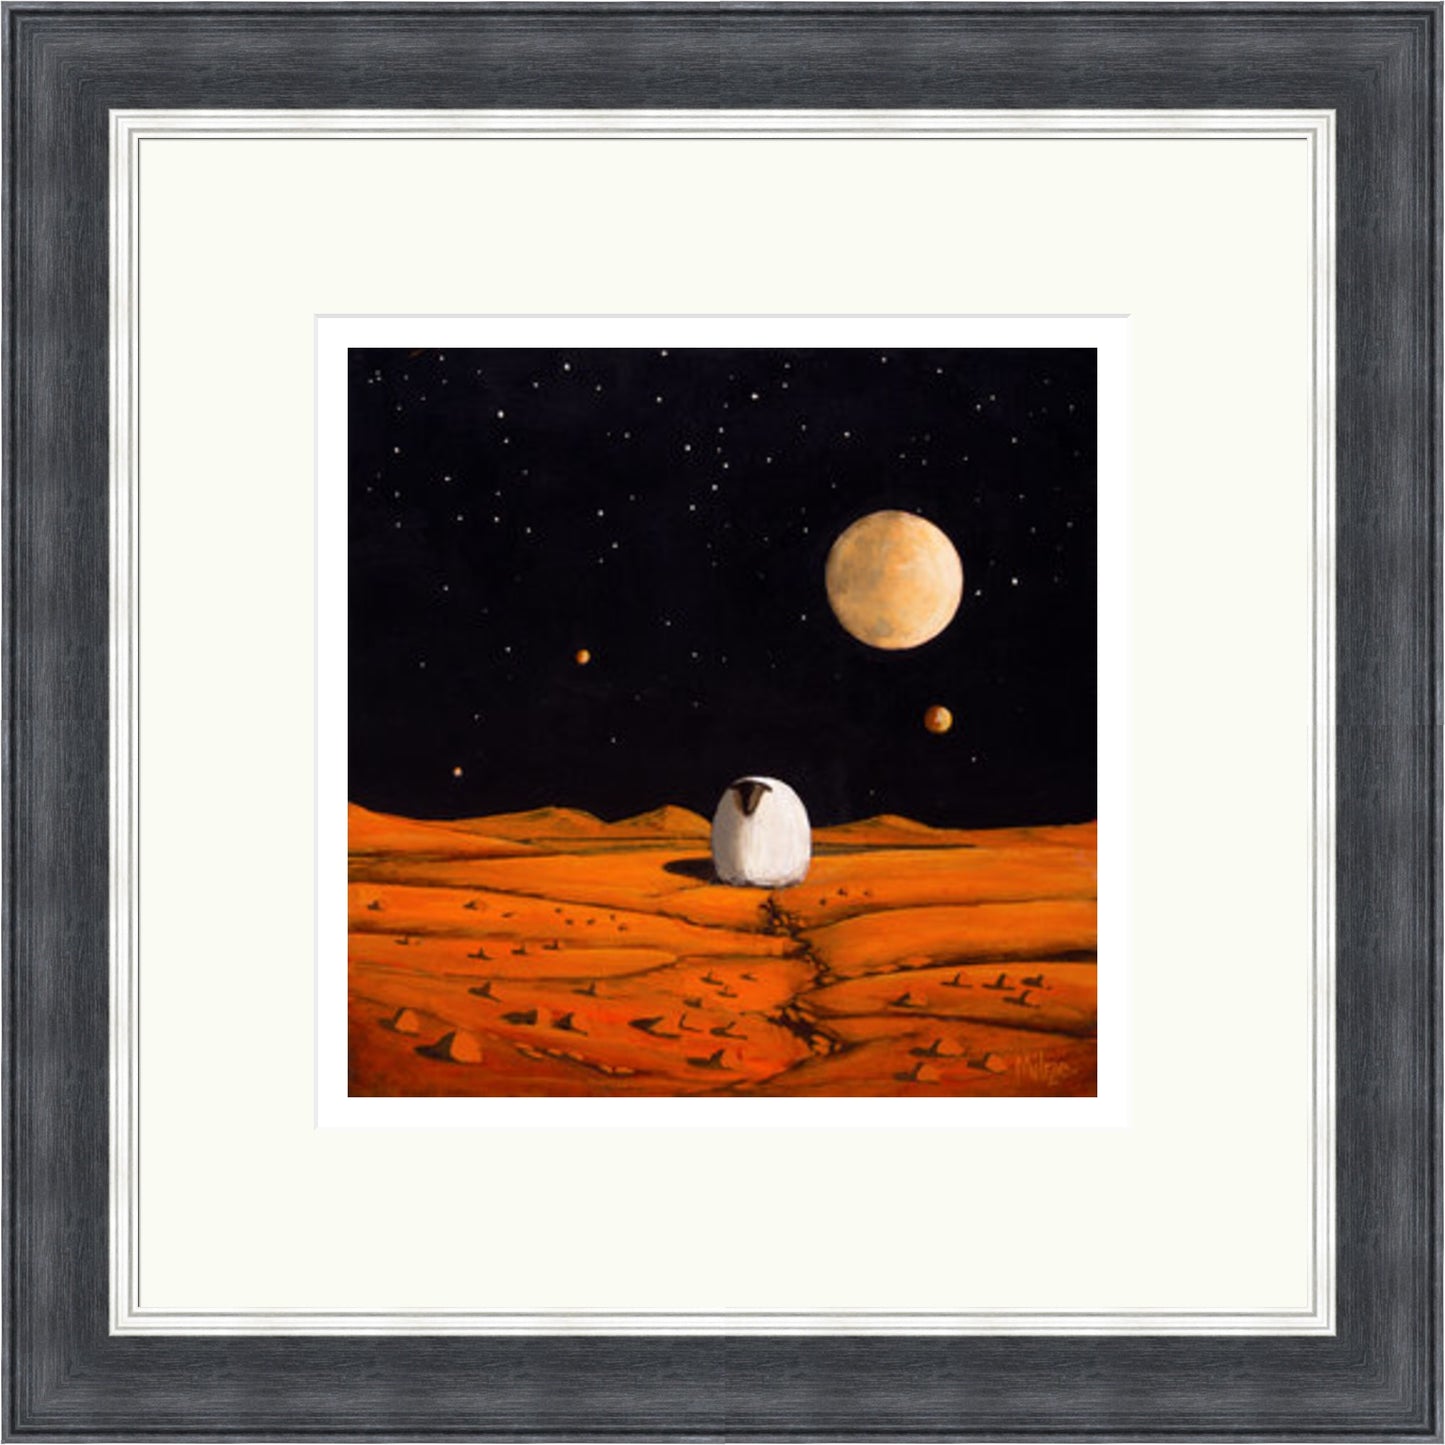 The Martian by Stan Milne